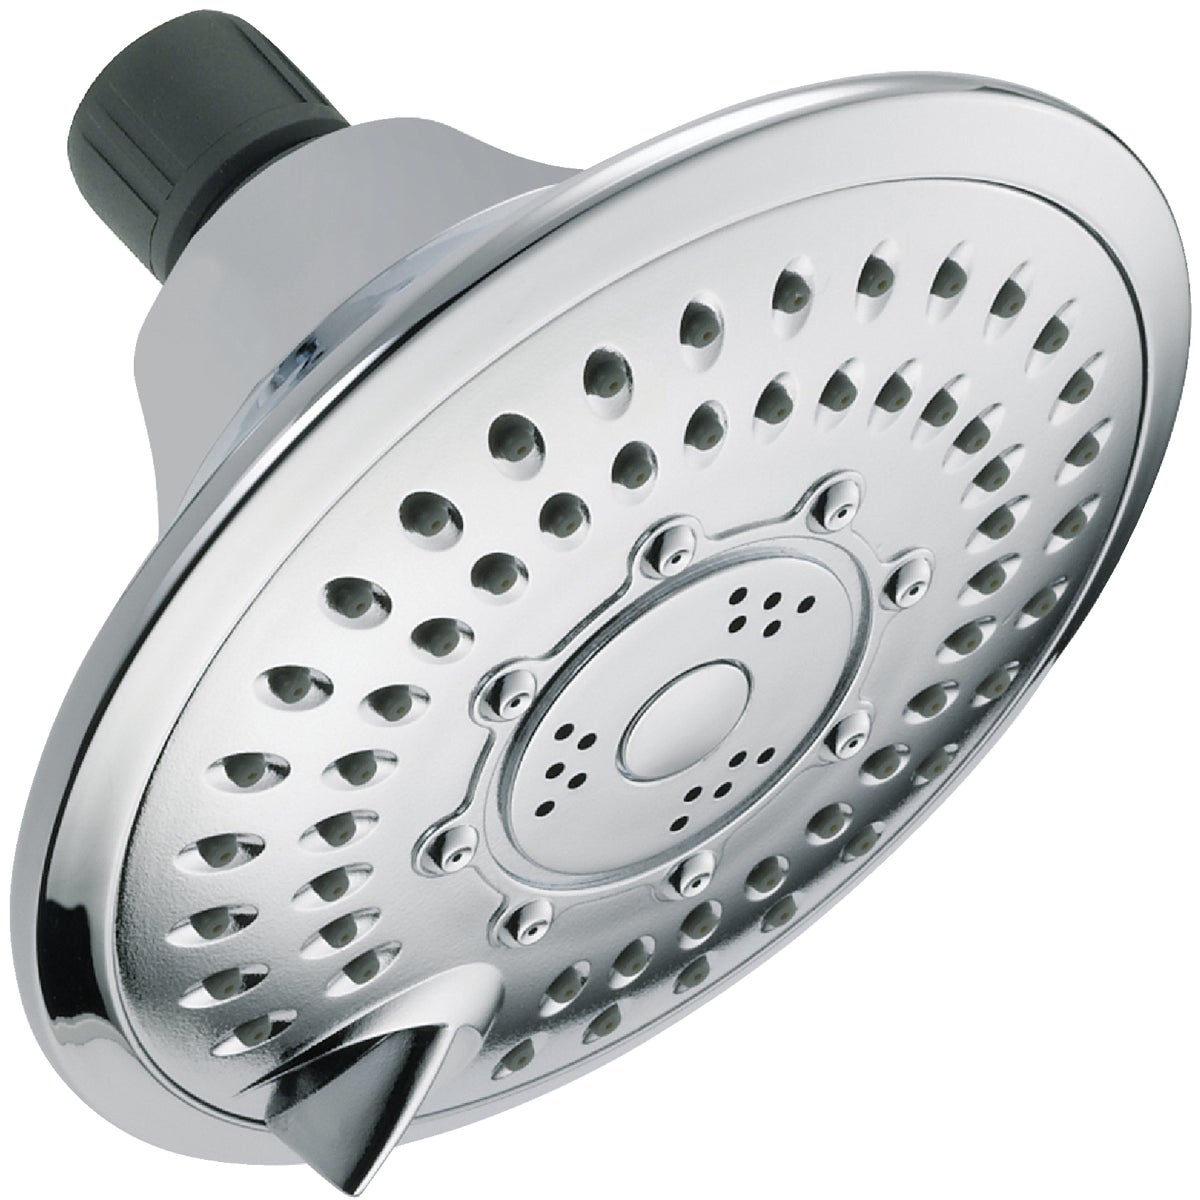 Item 400381, Replace your old showerhead with this 5 spray setting, 5" showerhead in 